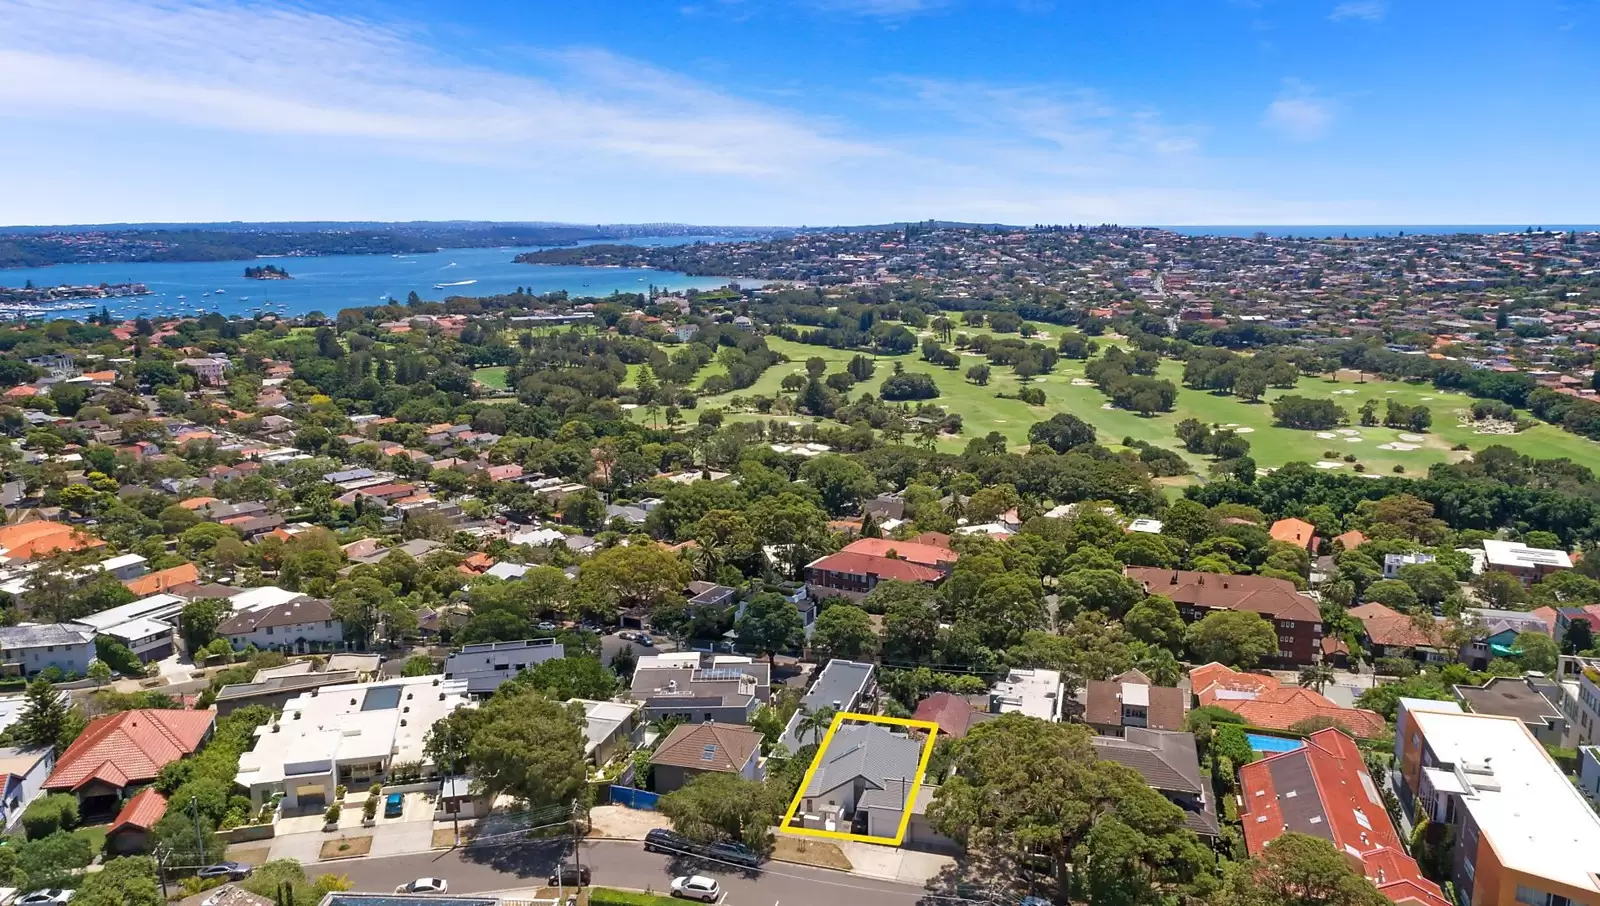 Photo #6: 11 Benelong Crescent, Bellevue Hill - Sold by Sydney Sotheby's International Realty